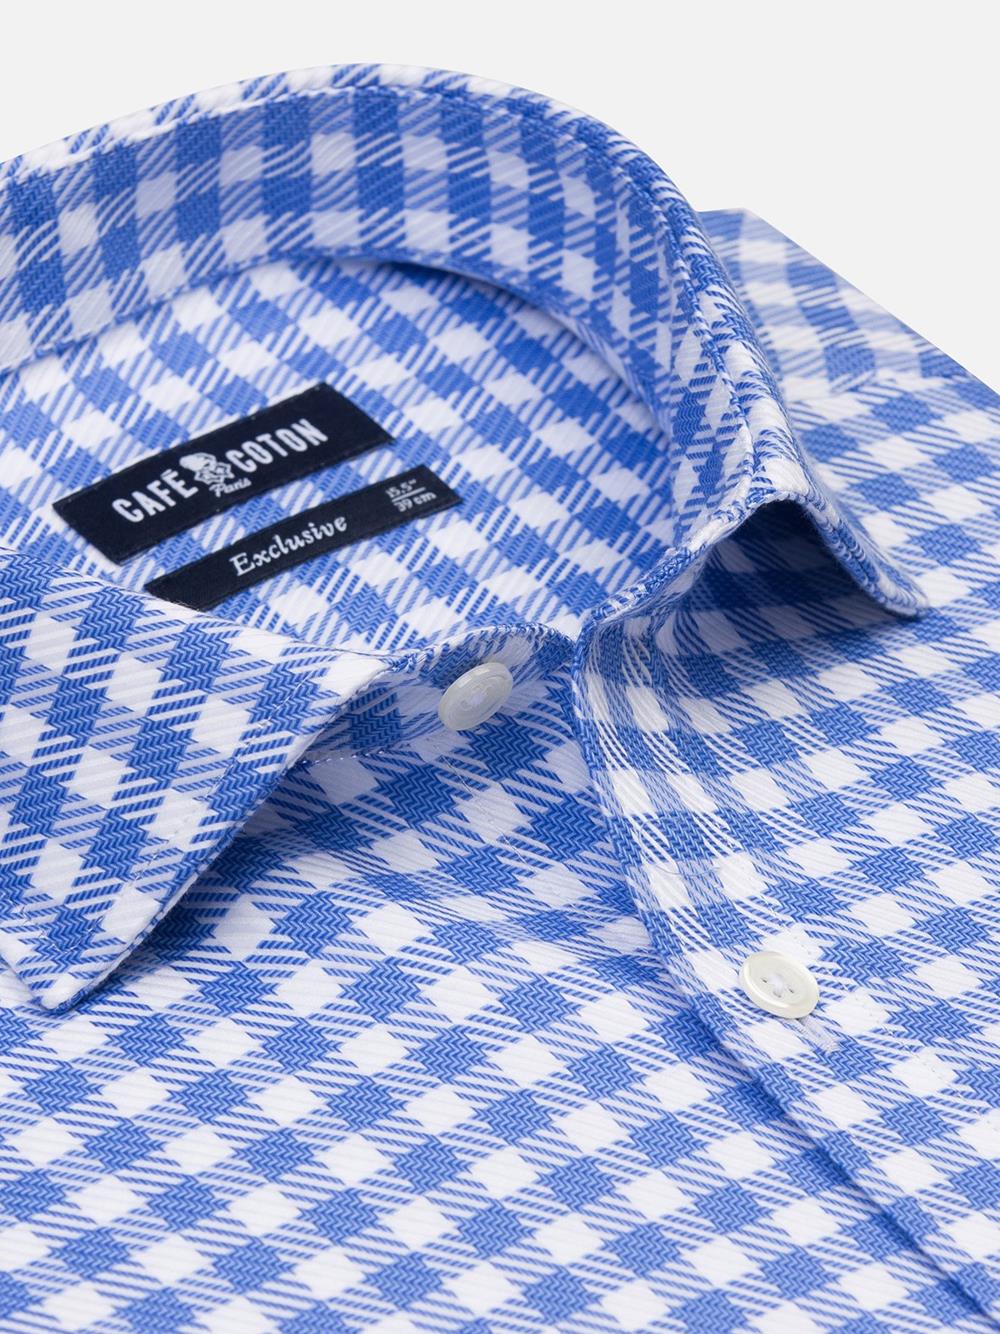 Phil sky blue checked slim fit shirt - Extra long sleeves